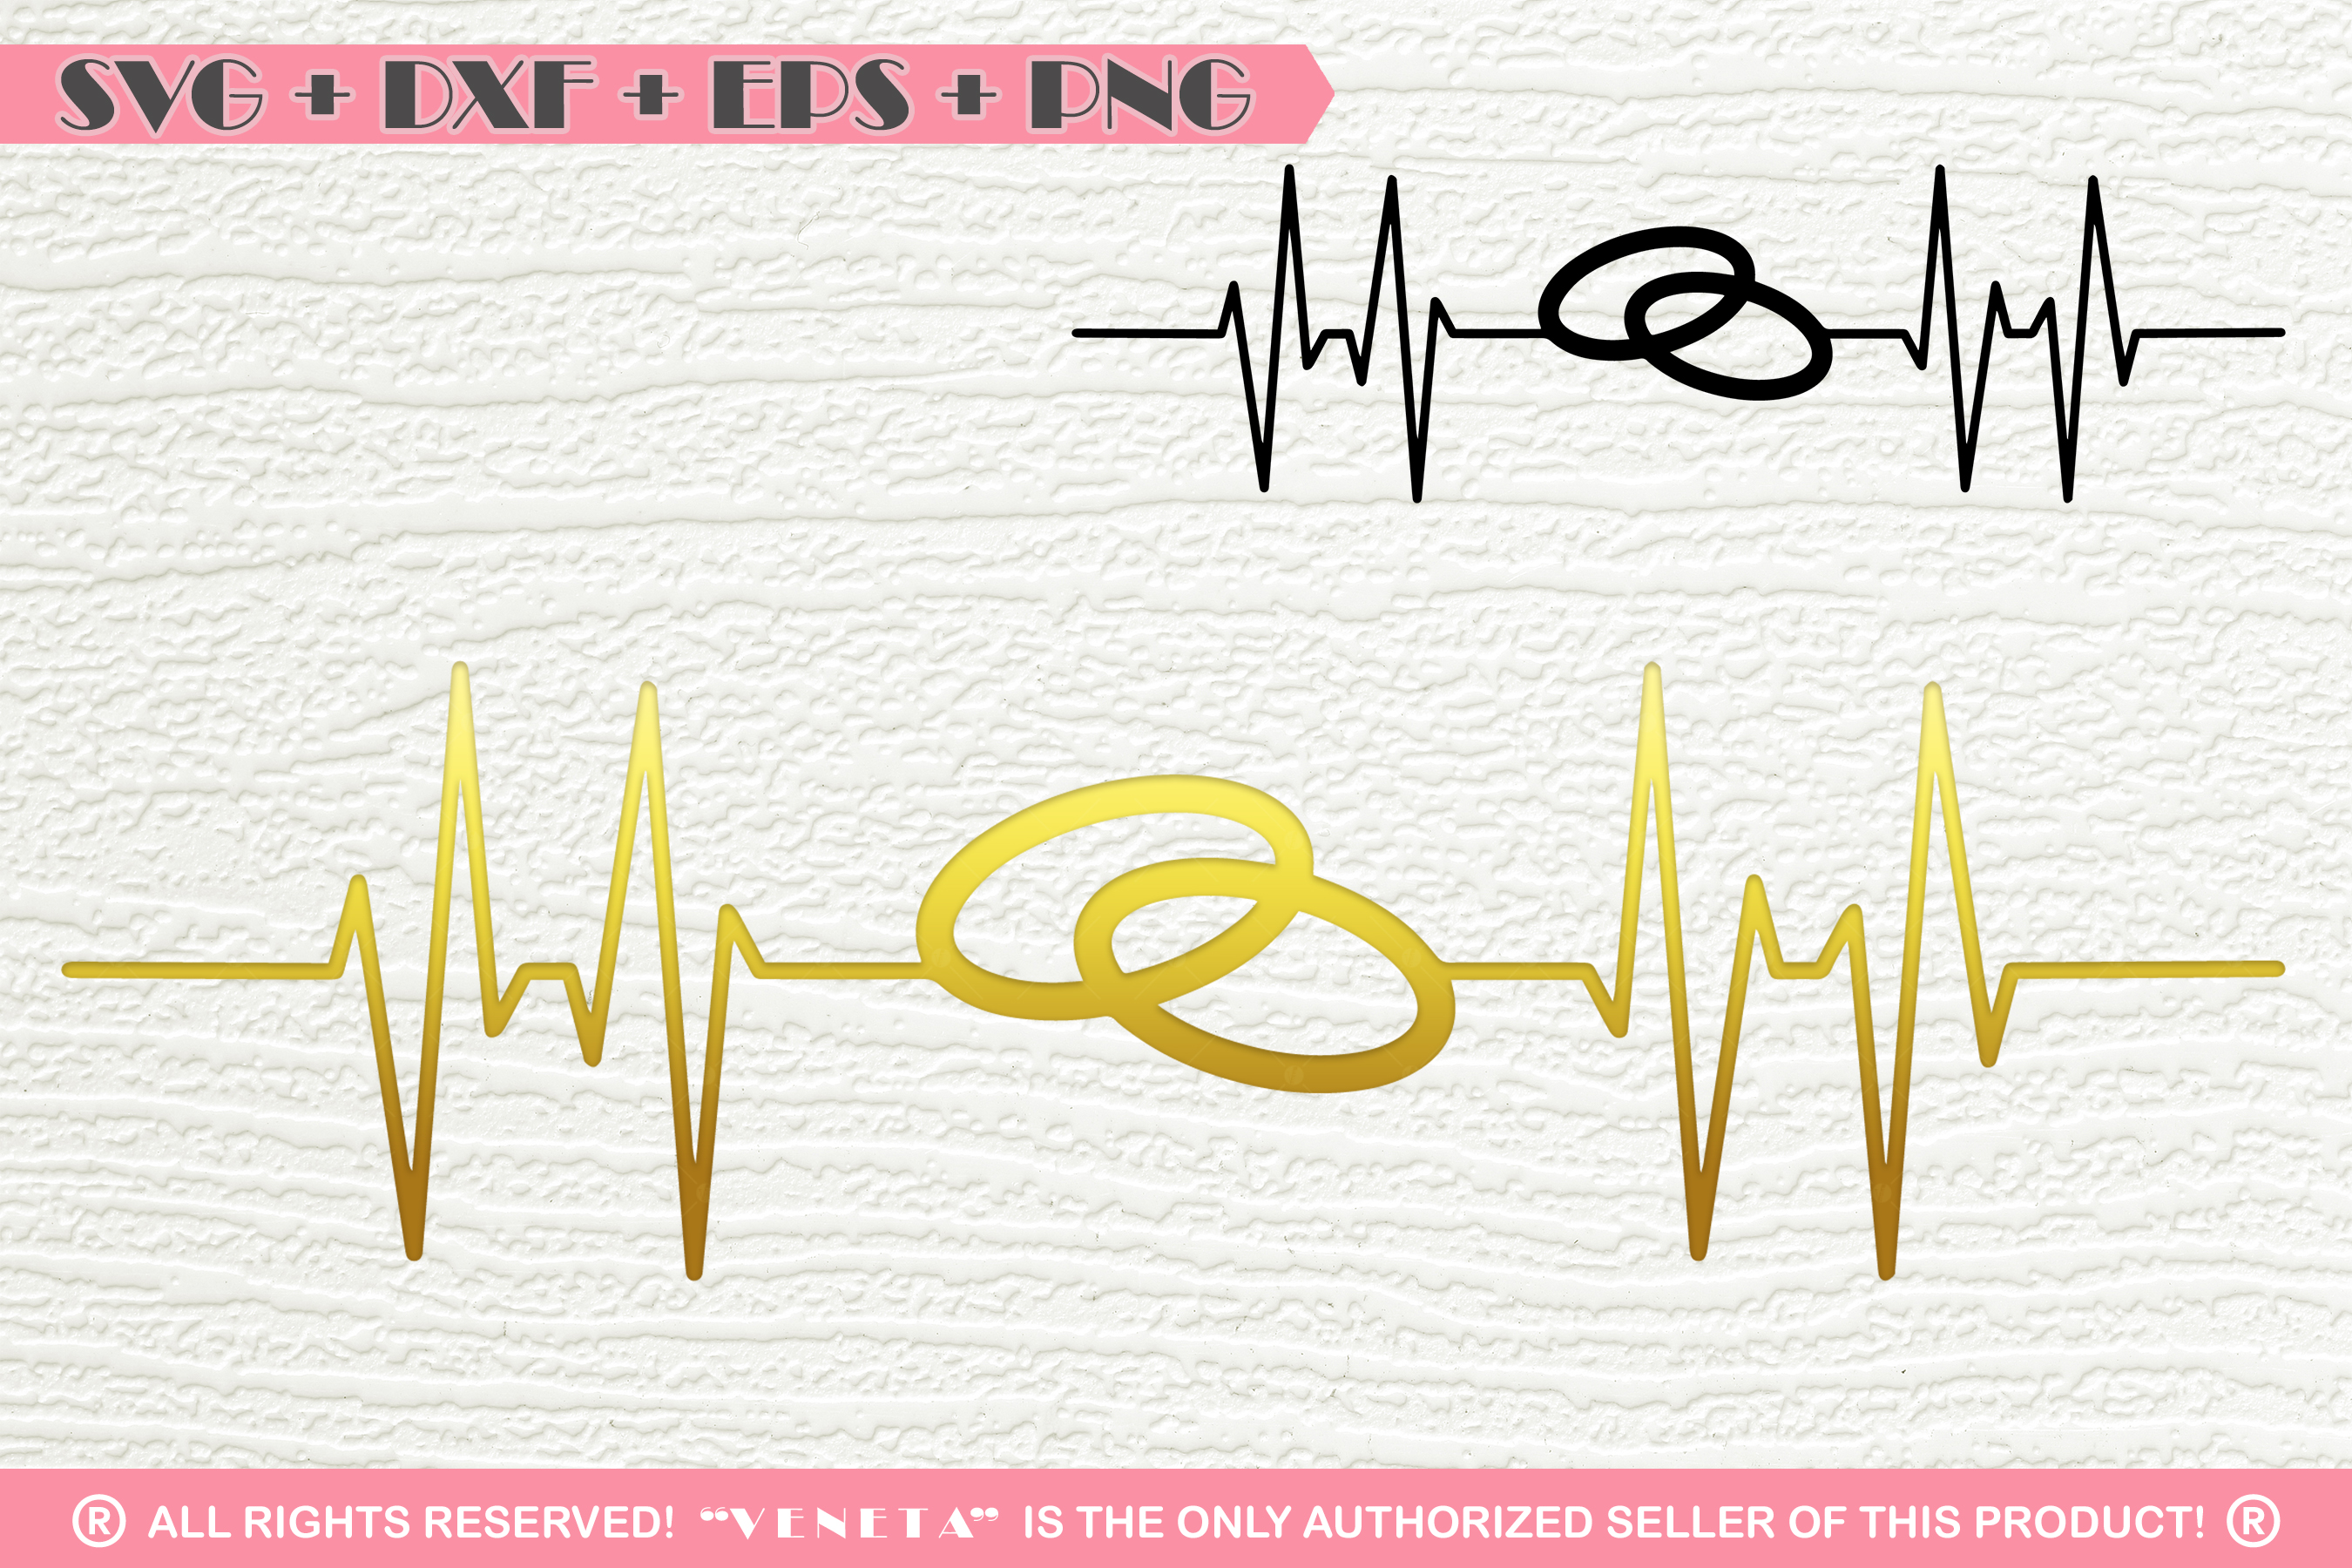 Download Wedding rings | Hearbeat | EKG |SVG DXF PNG EPS Cutting ...